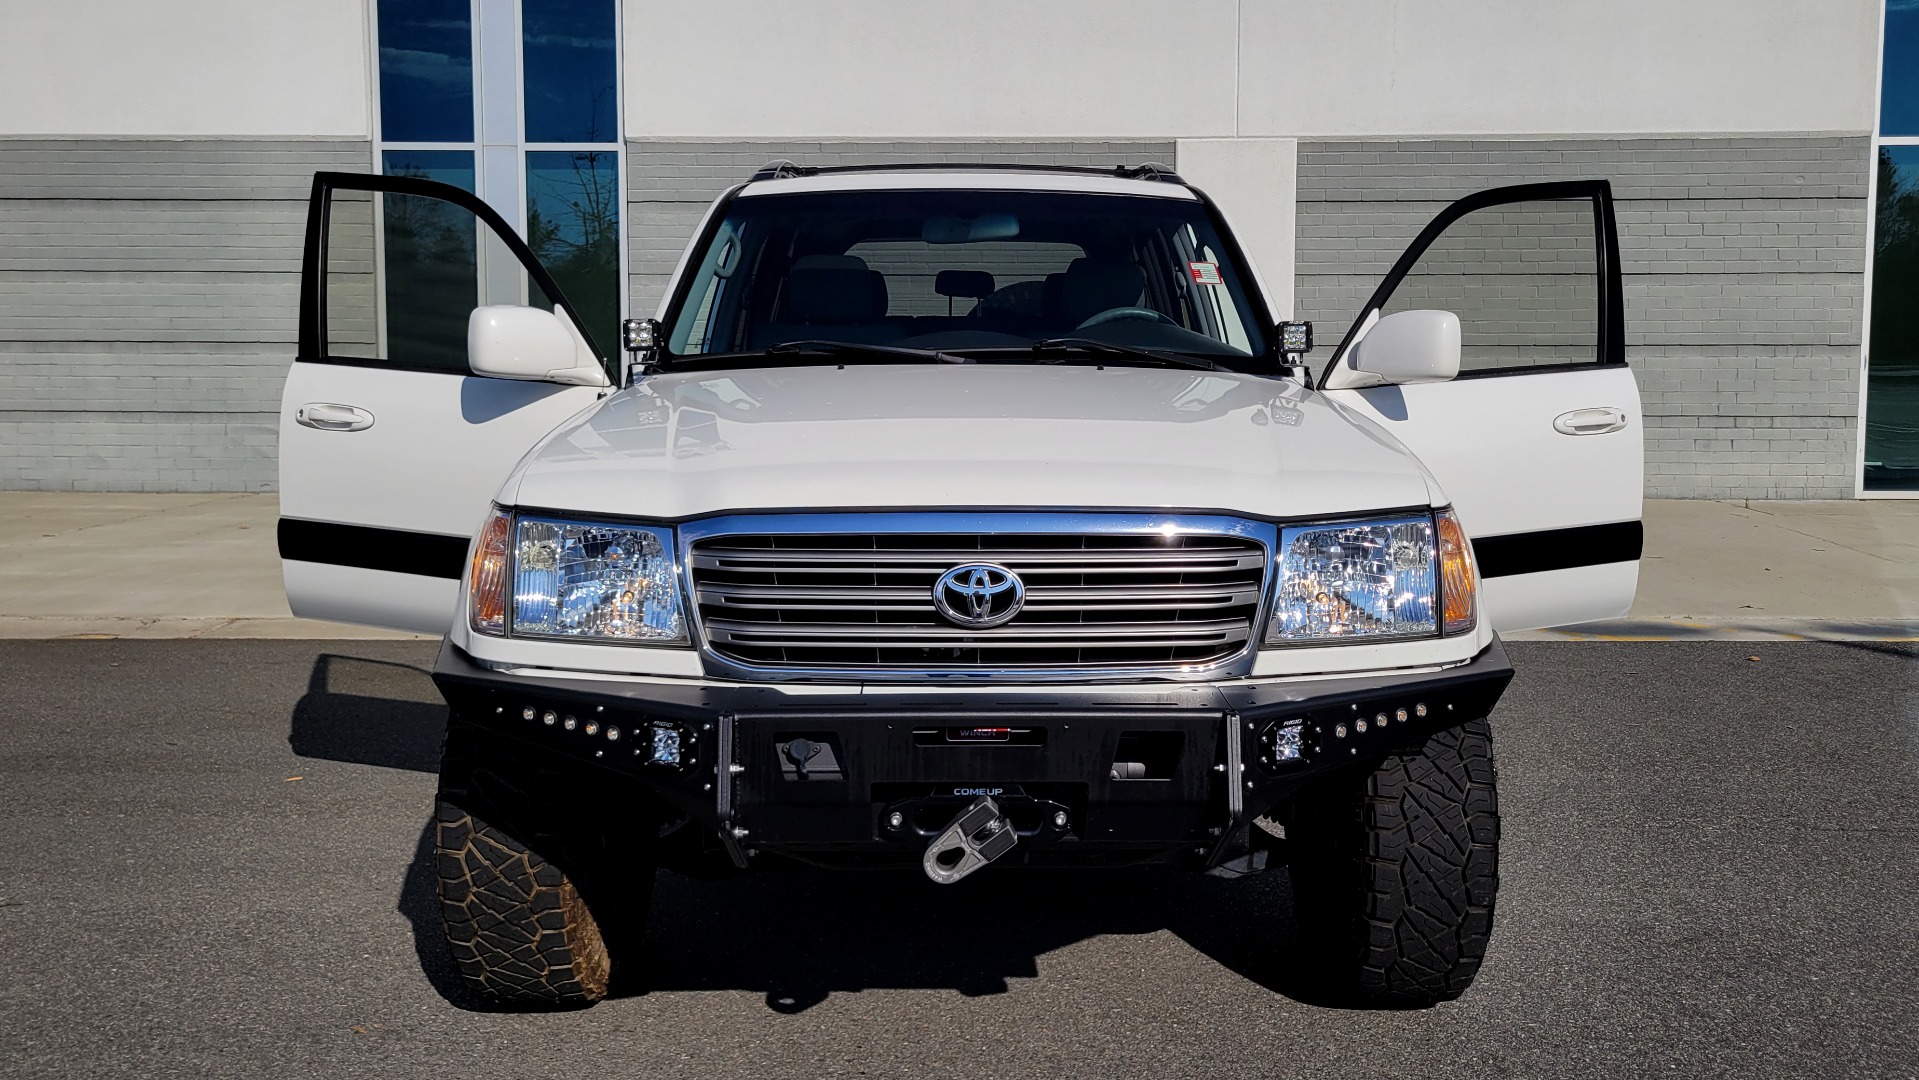 Used 2003 Toyota LAND CRUISER 4WD WAGON / 4.7L V8 / AUTO / NAVIGATION / LIFT / CUSTOM WHEELS for sale $27,999 at Formula Imports in Charlotte NC 28227 25